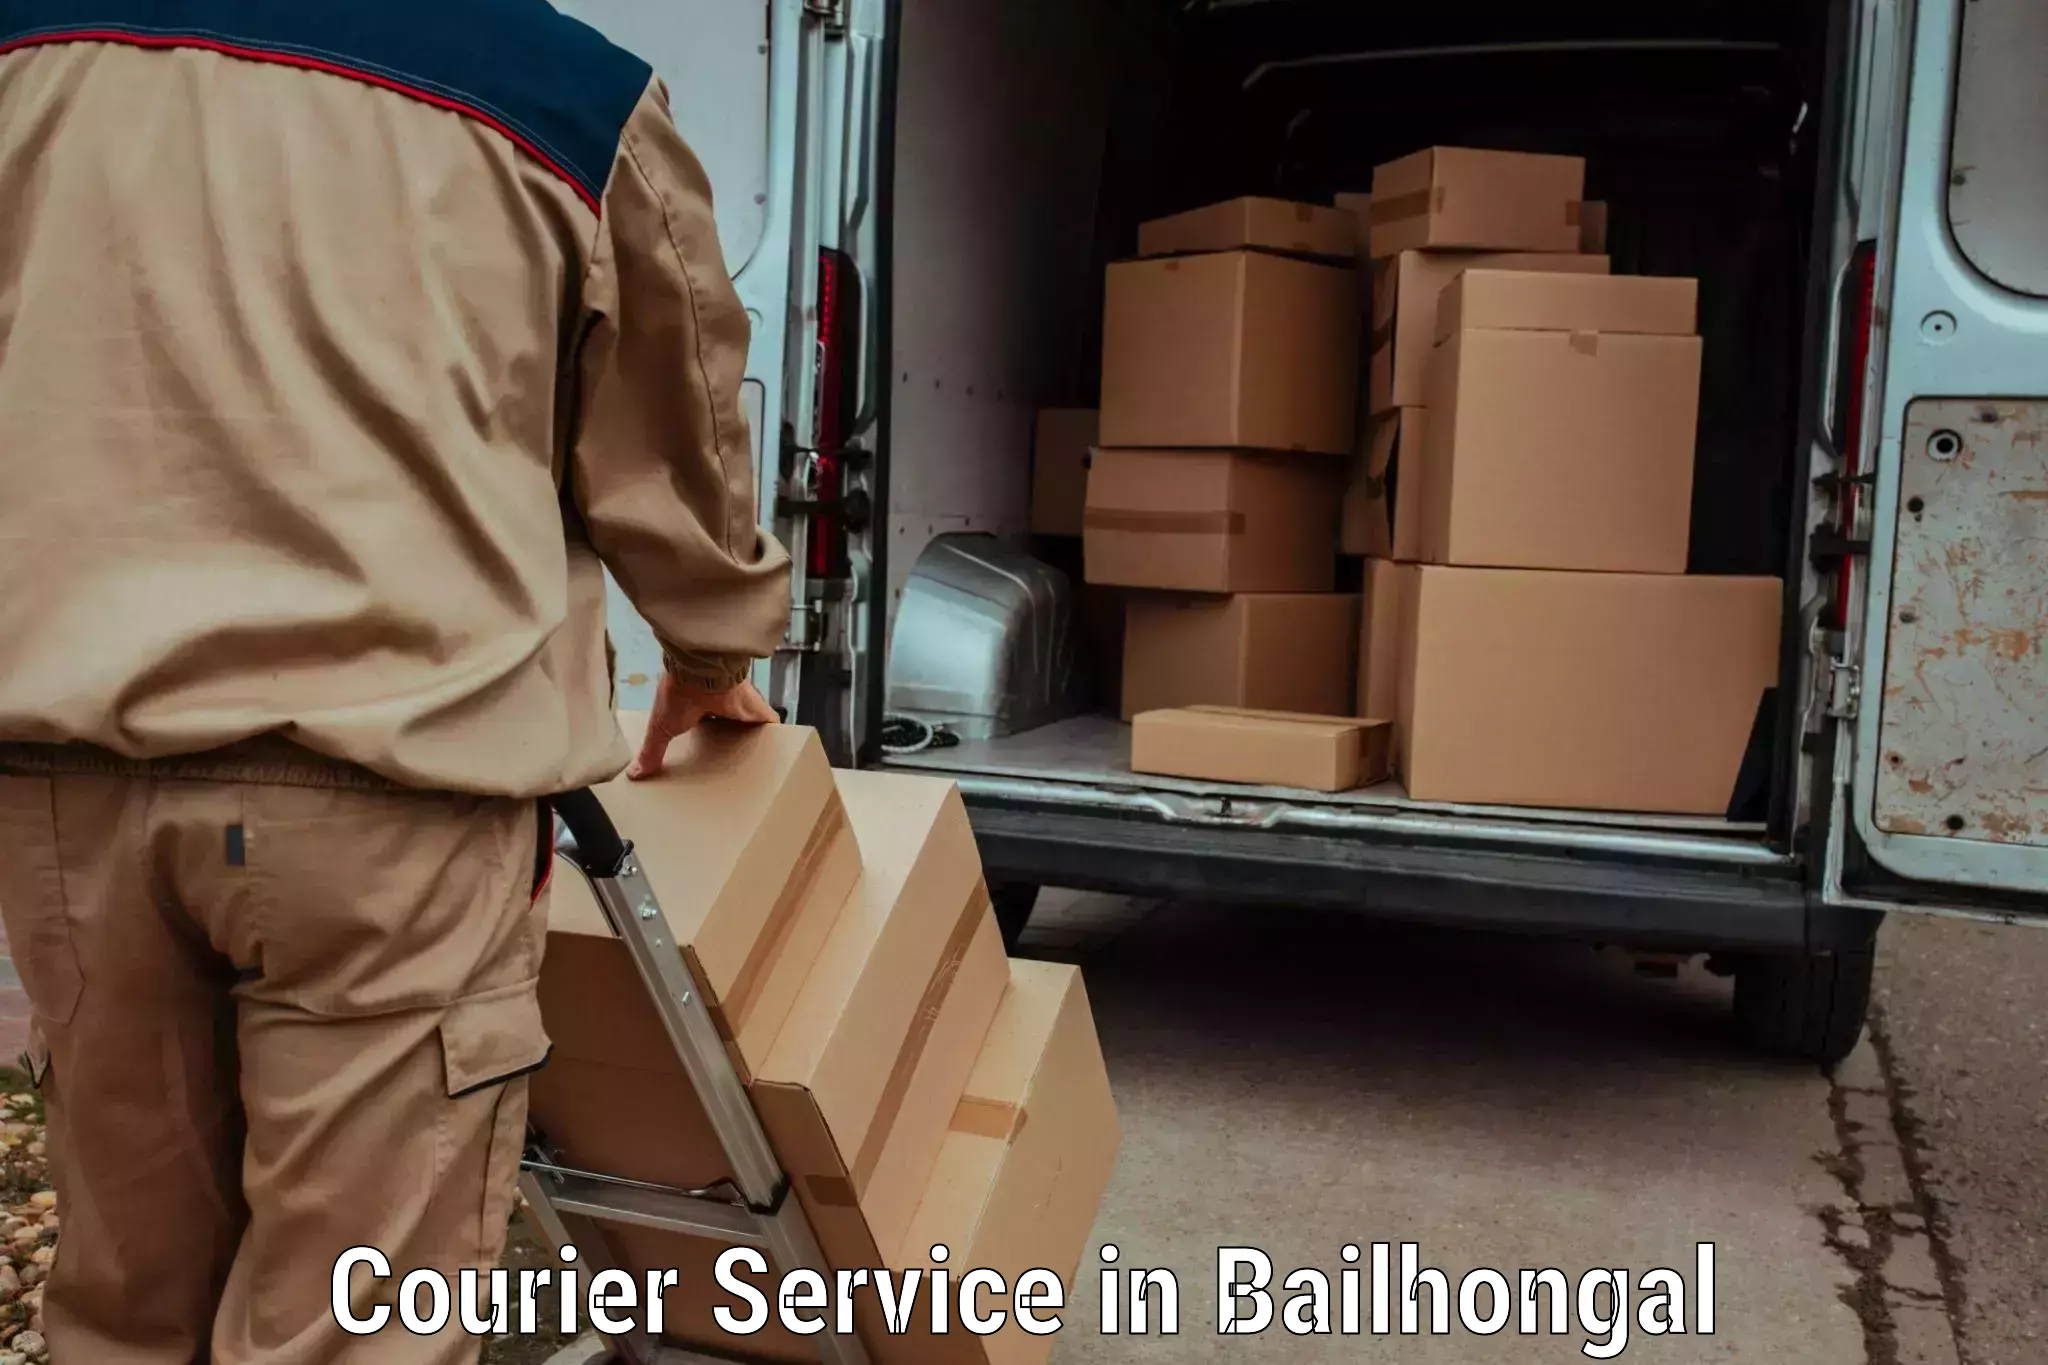 E-commerce shipping in Bailhongal